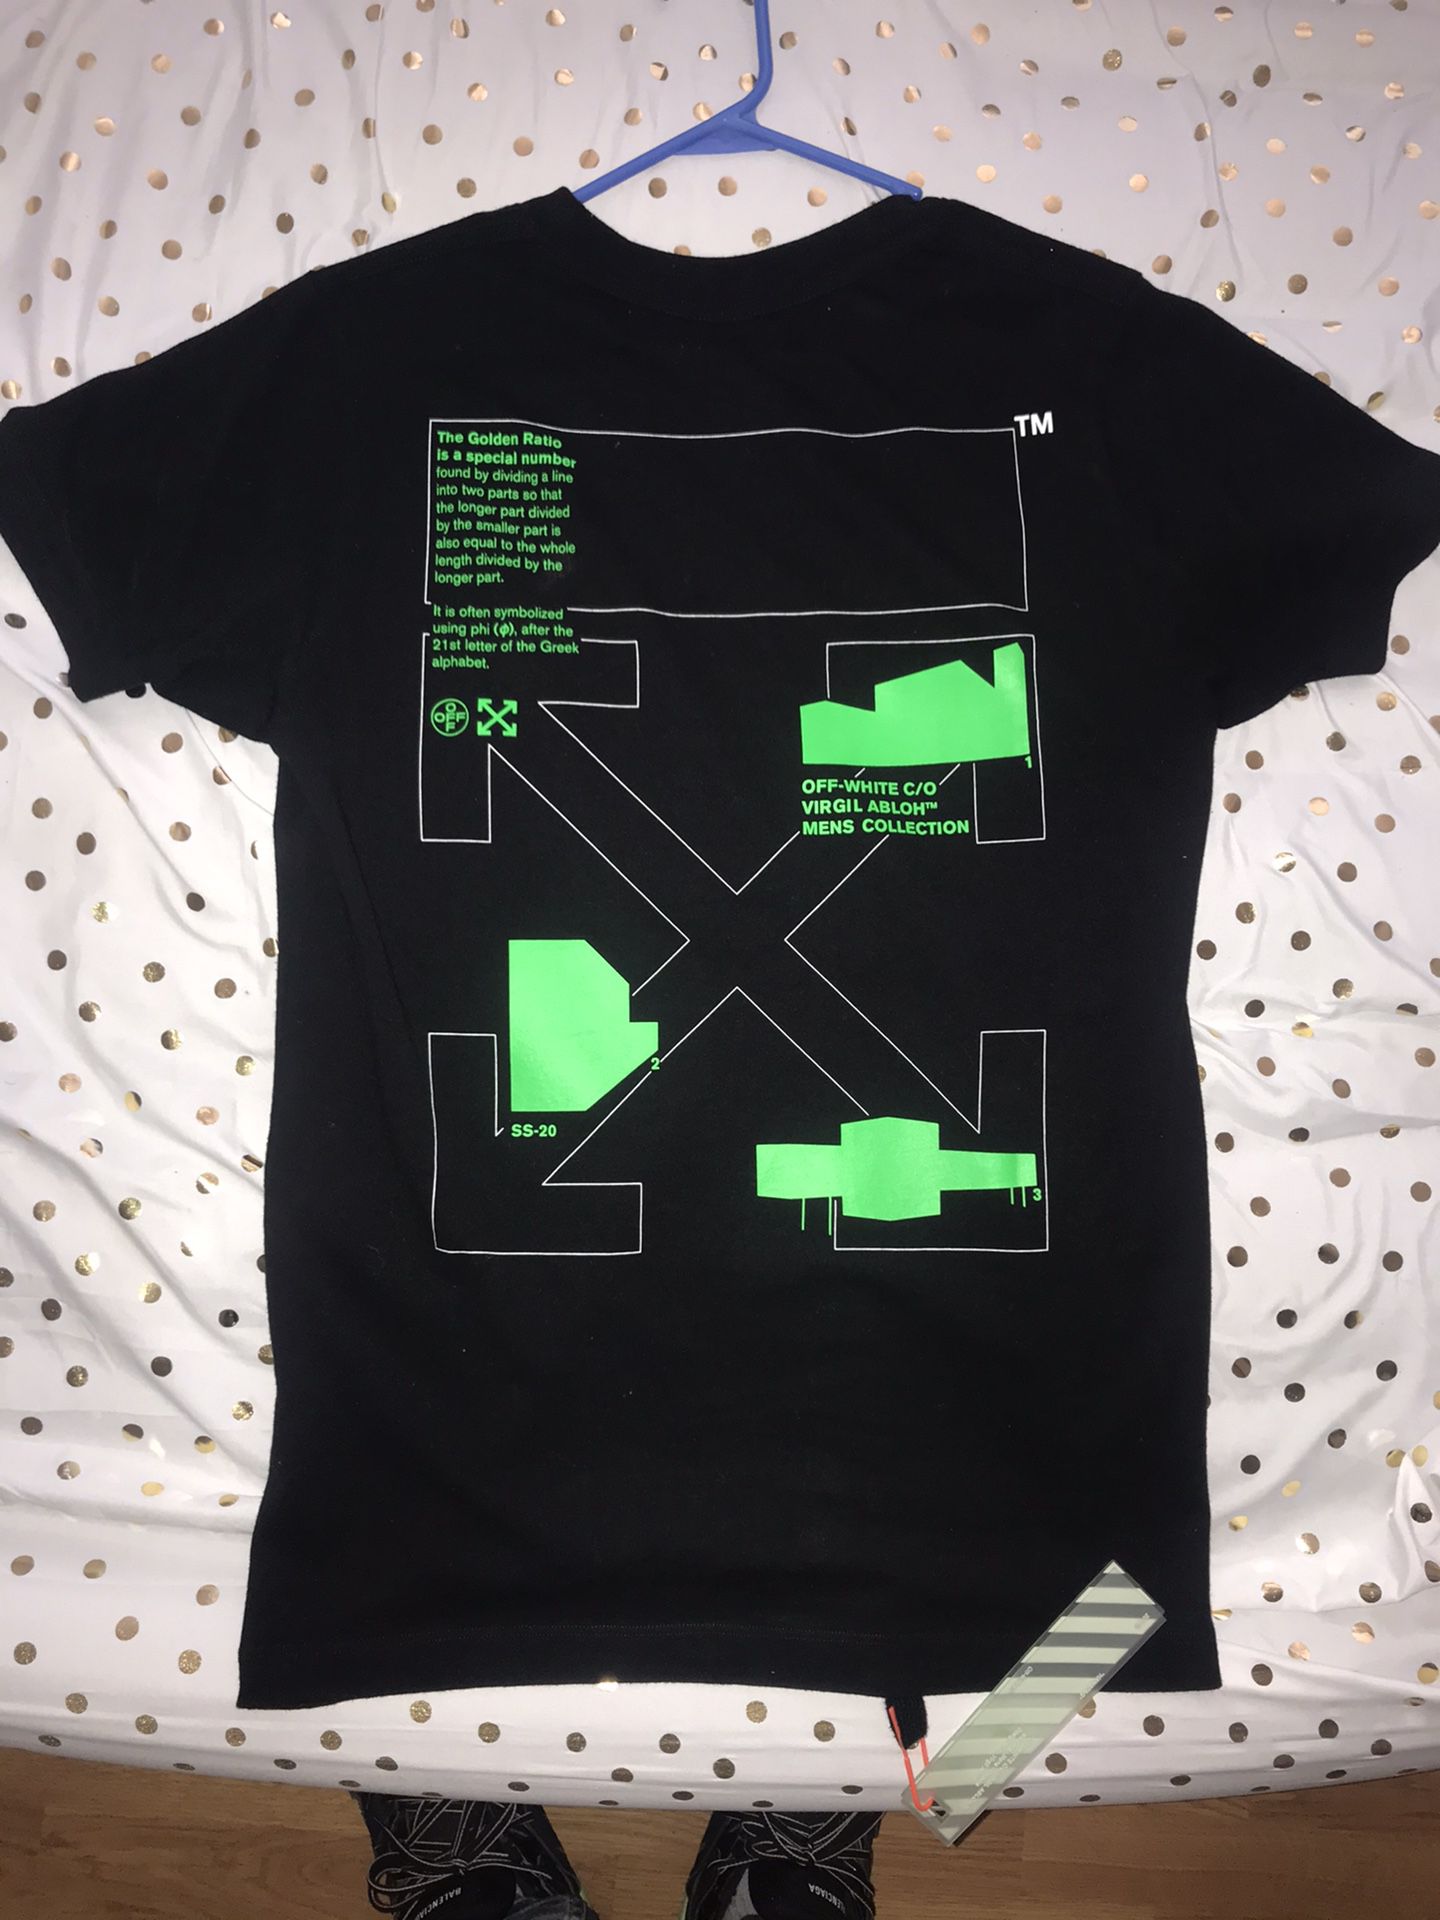 New 2020 spring off white t-shirt wore only once